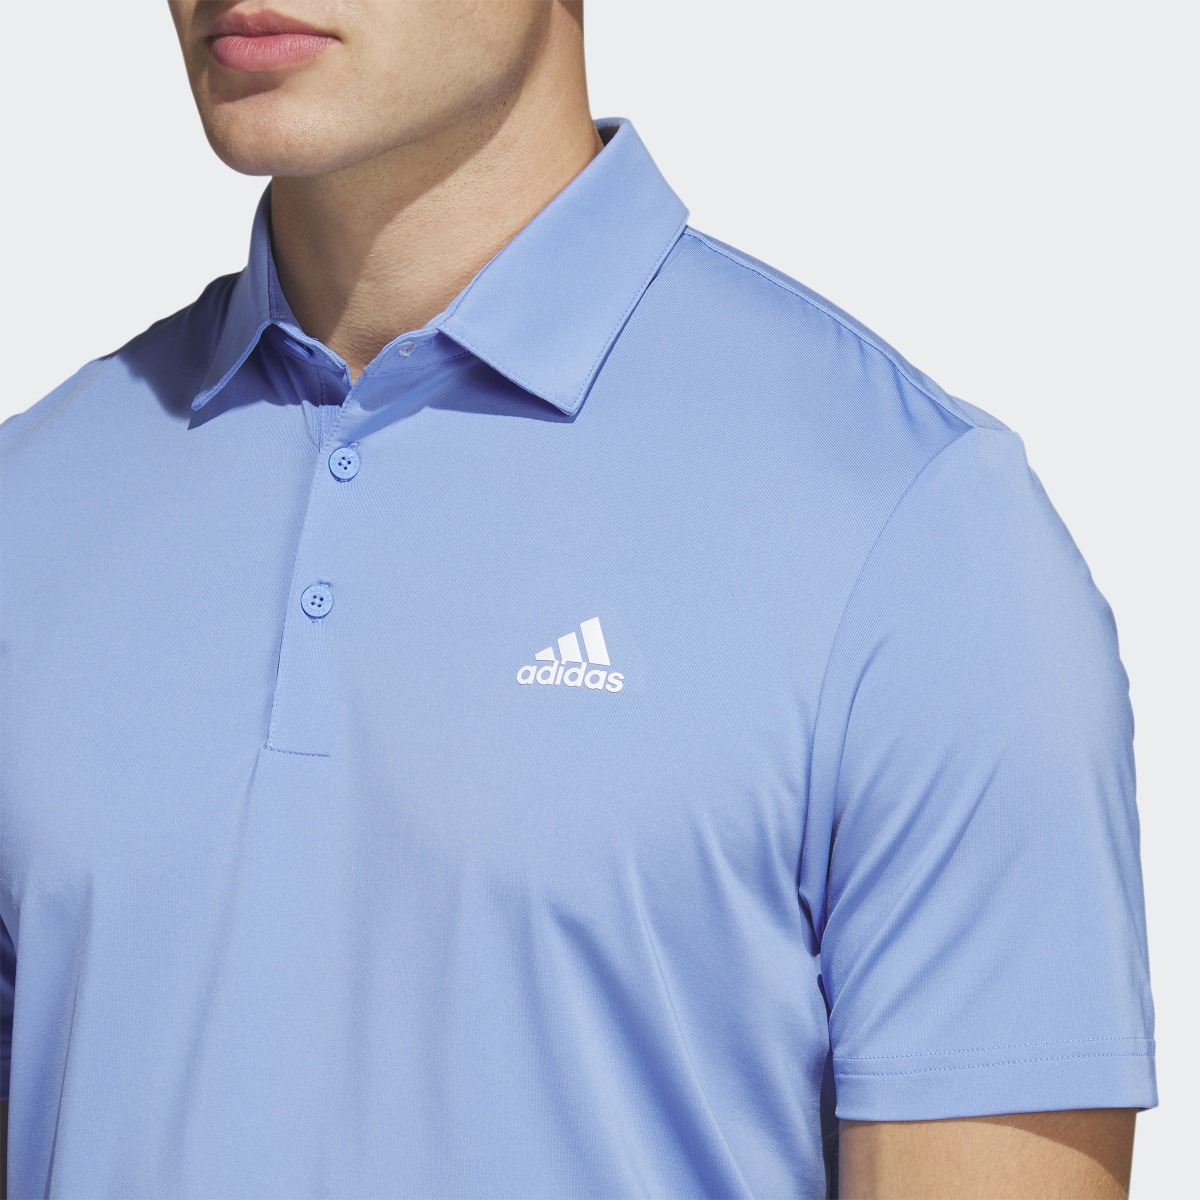 Adidas Ultimate365 Solid Left Chest Polo Shirt. 6